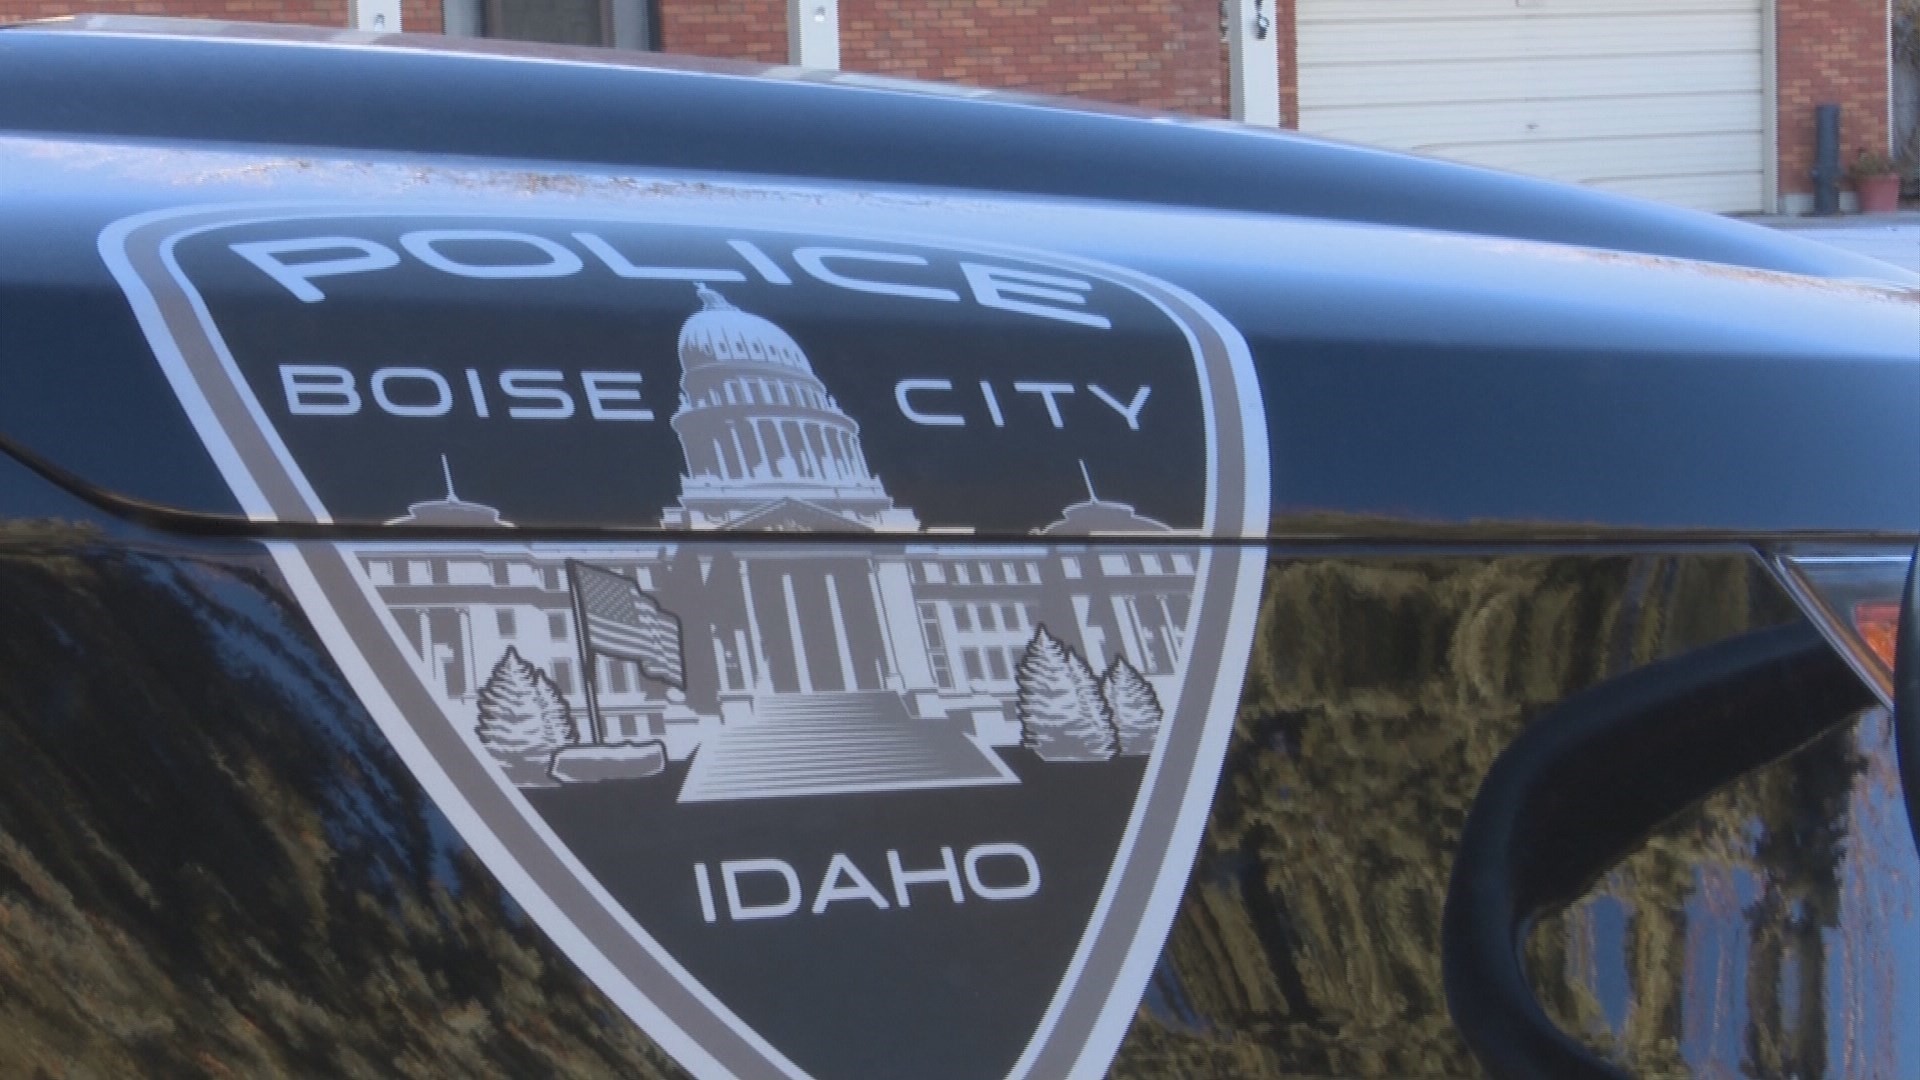 The Boise Police Department arrested 22-year-old Jacob Mosman in connection to a shooting late Monday night in west Boise.